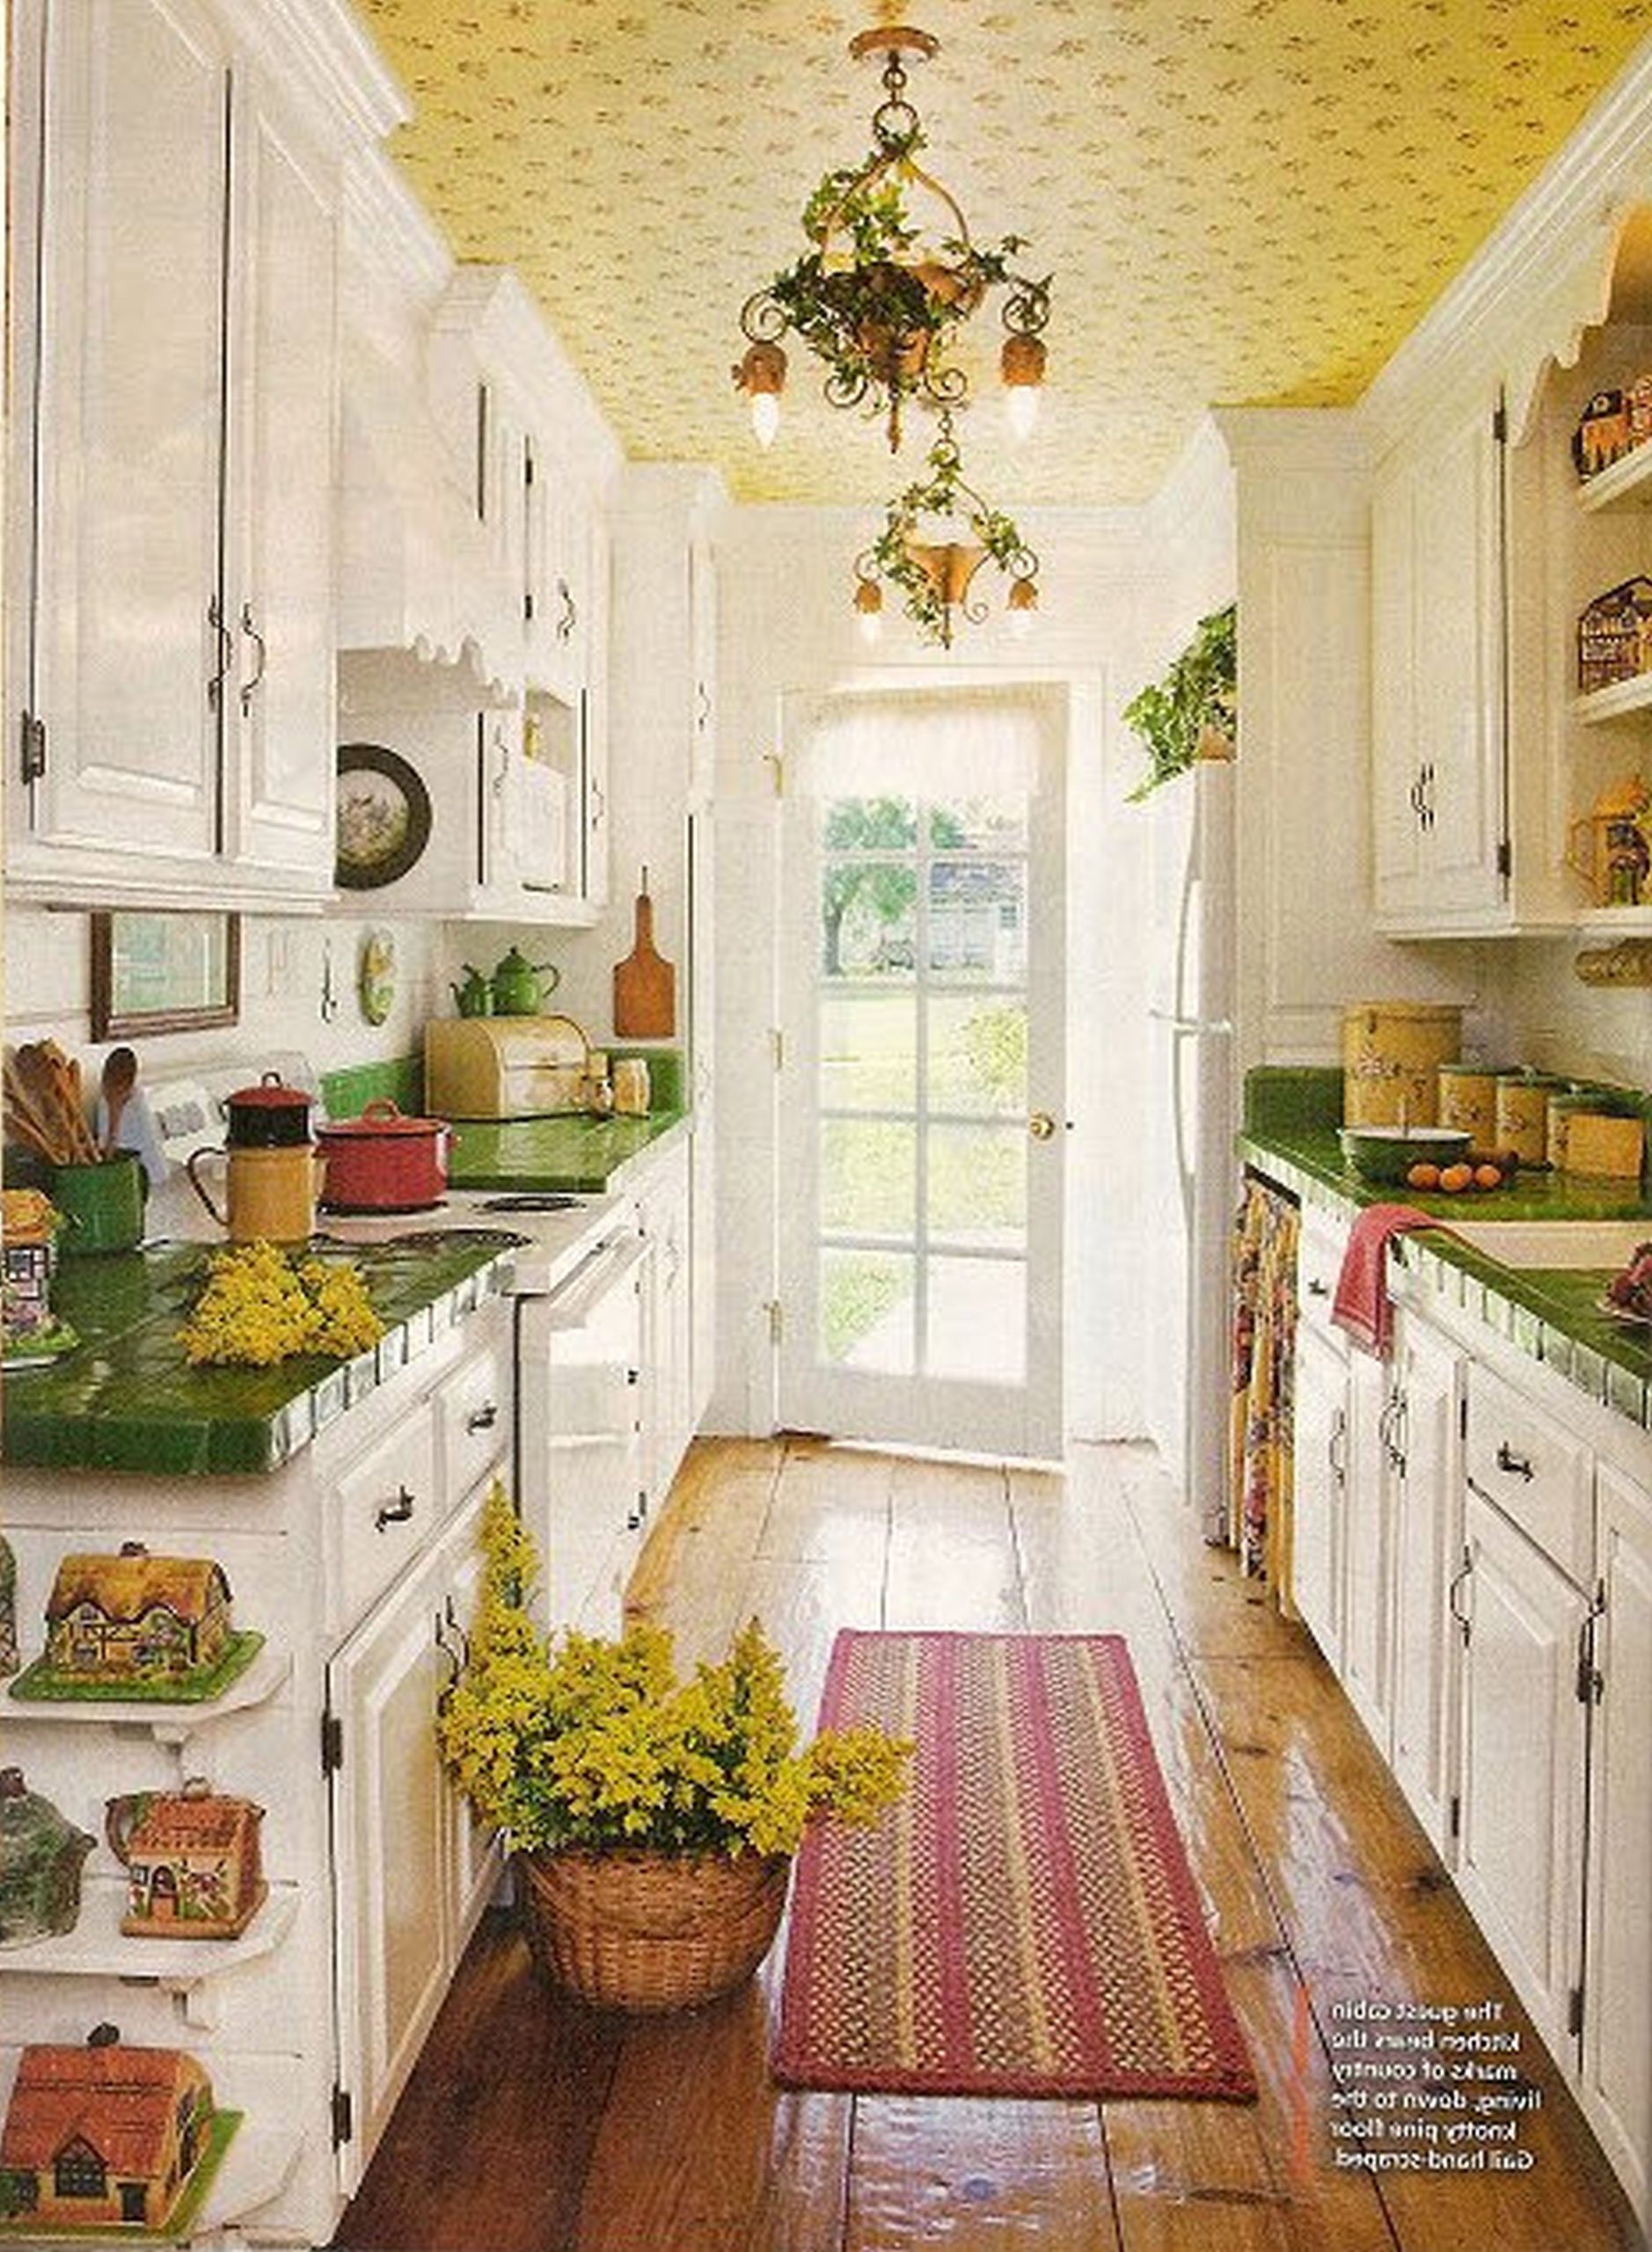 Galley Kitchen Ideas Of Country - Acnn Decor destiné Country Kitchen Design Ideas 